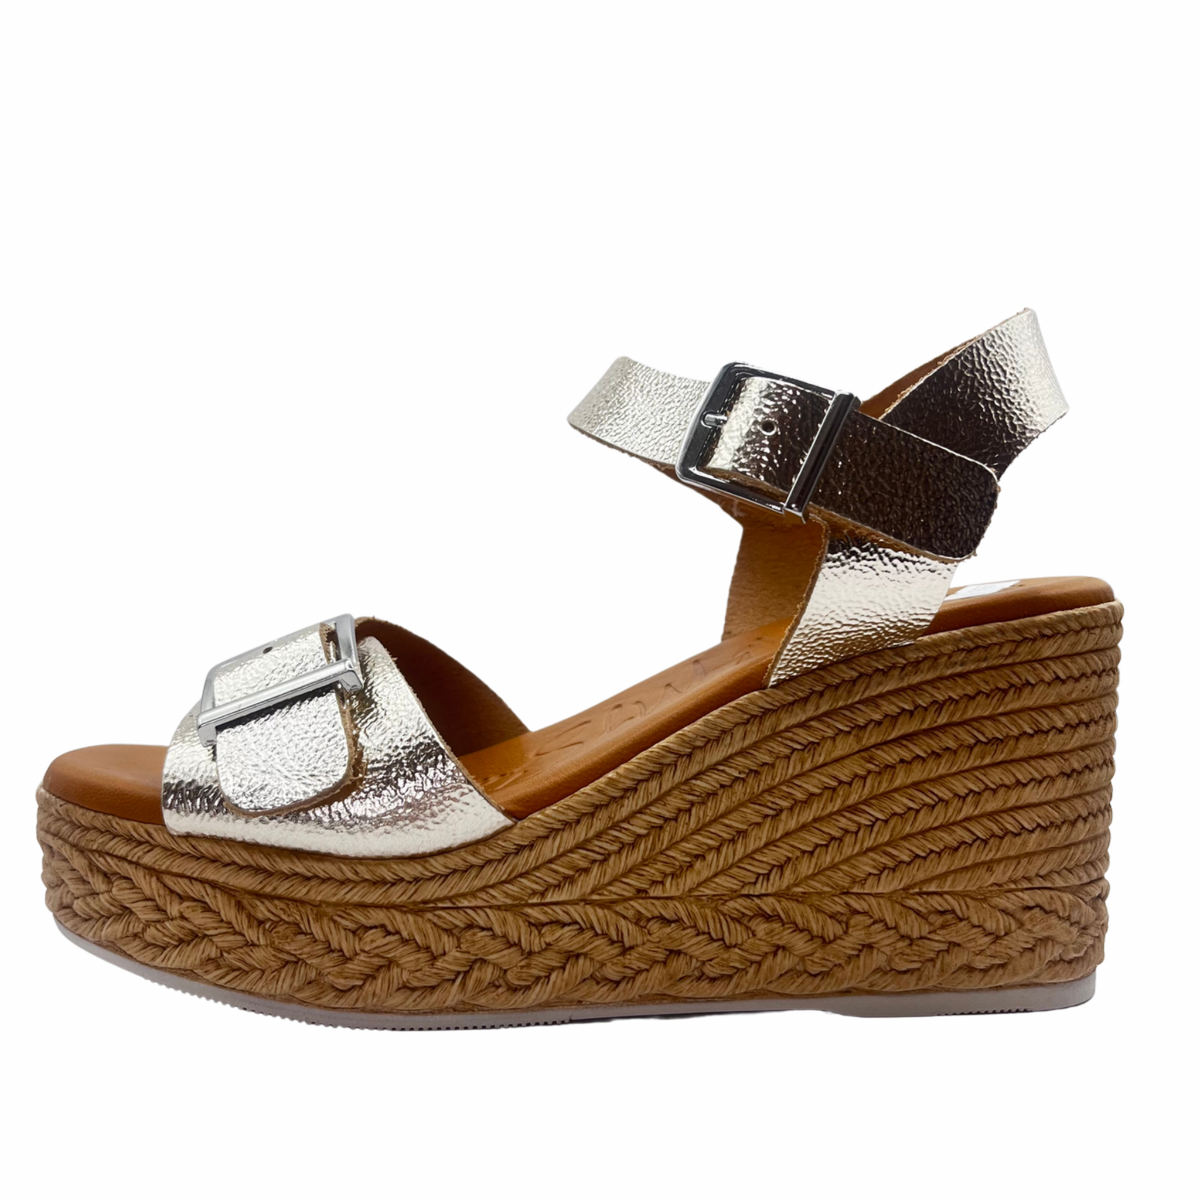 Oh My Sandals Woven Wedge Gold Leather Sandal